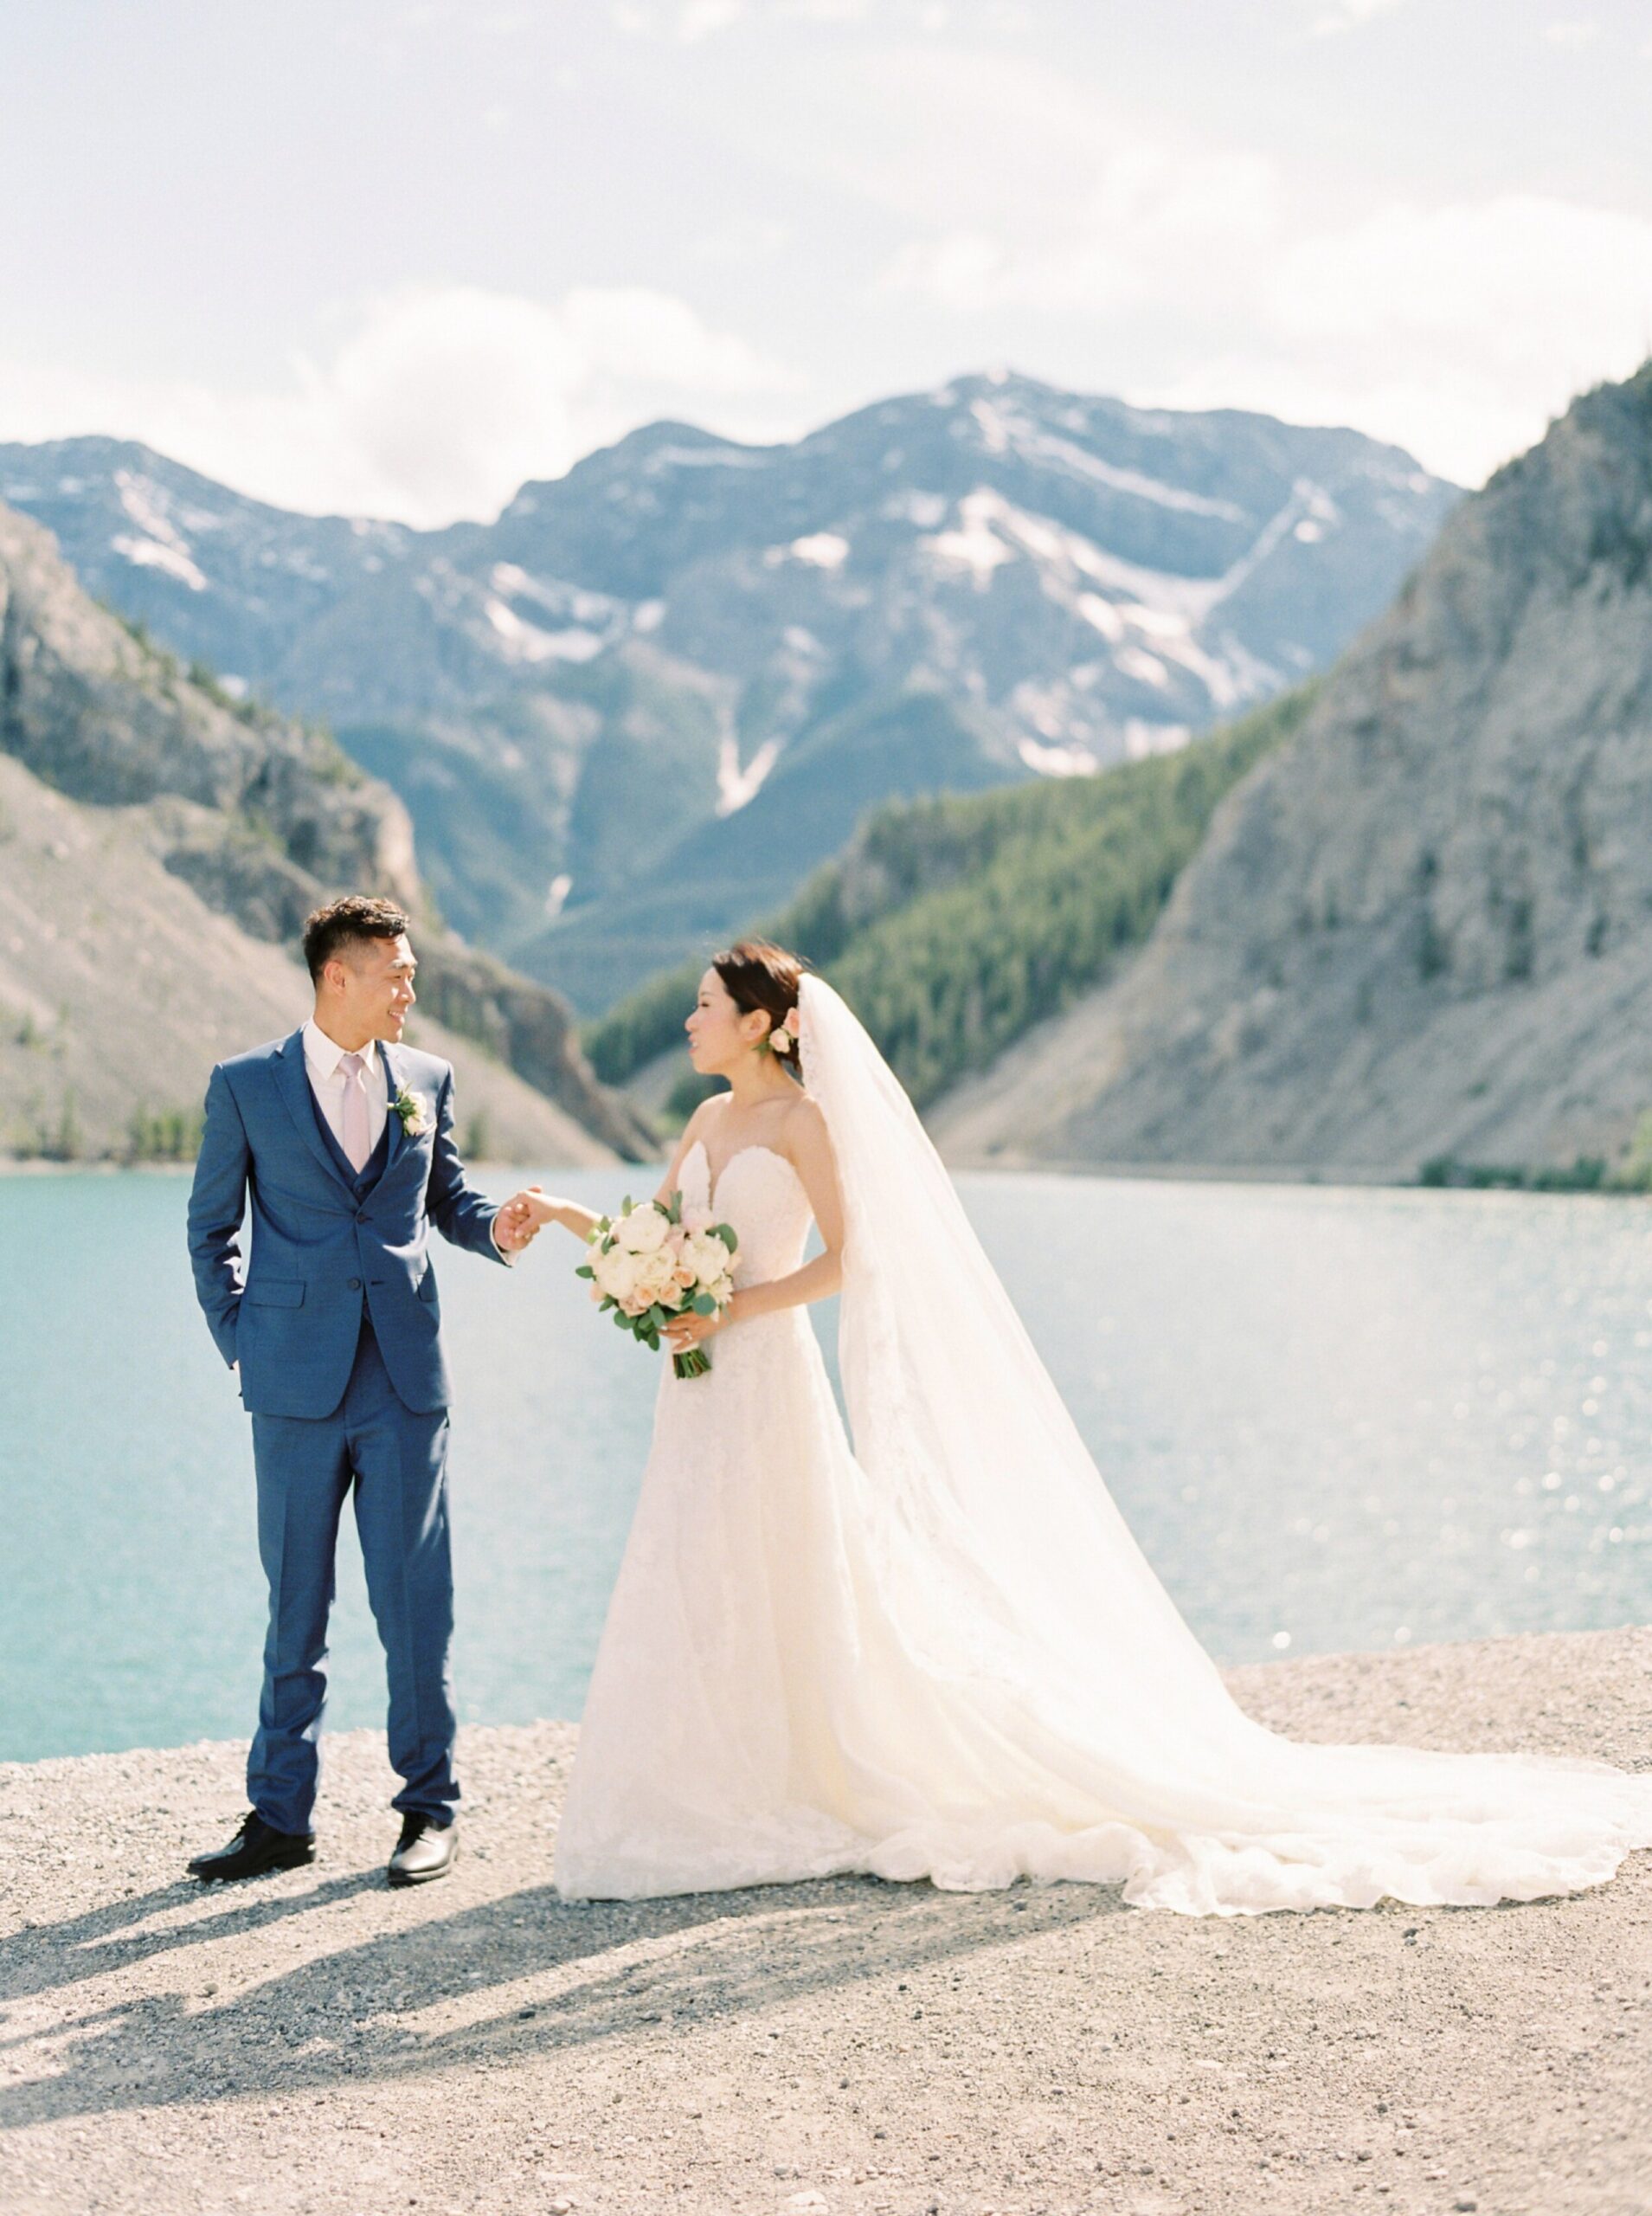  bride and groom portraits | pose ideas in the mountains | silvertip canmore wedding photographers 